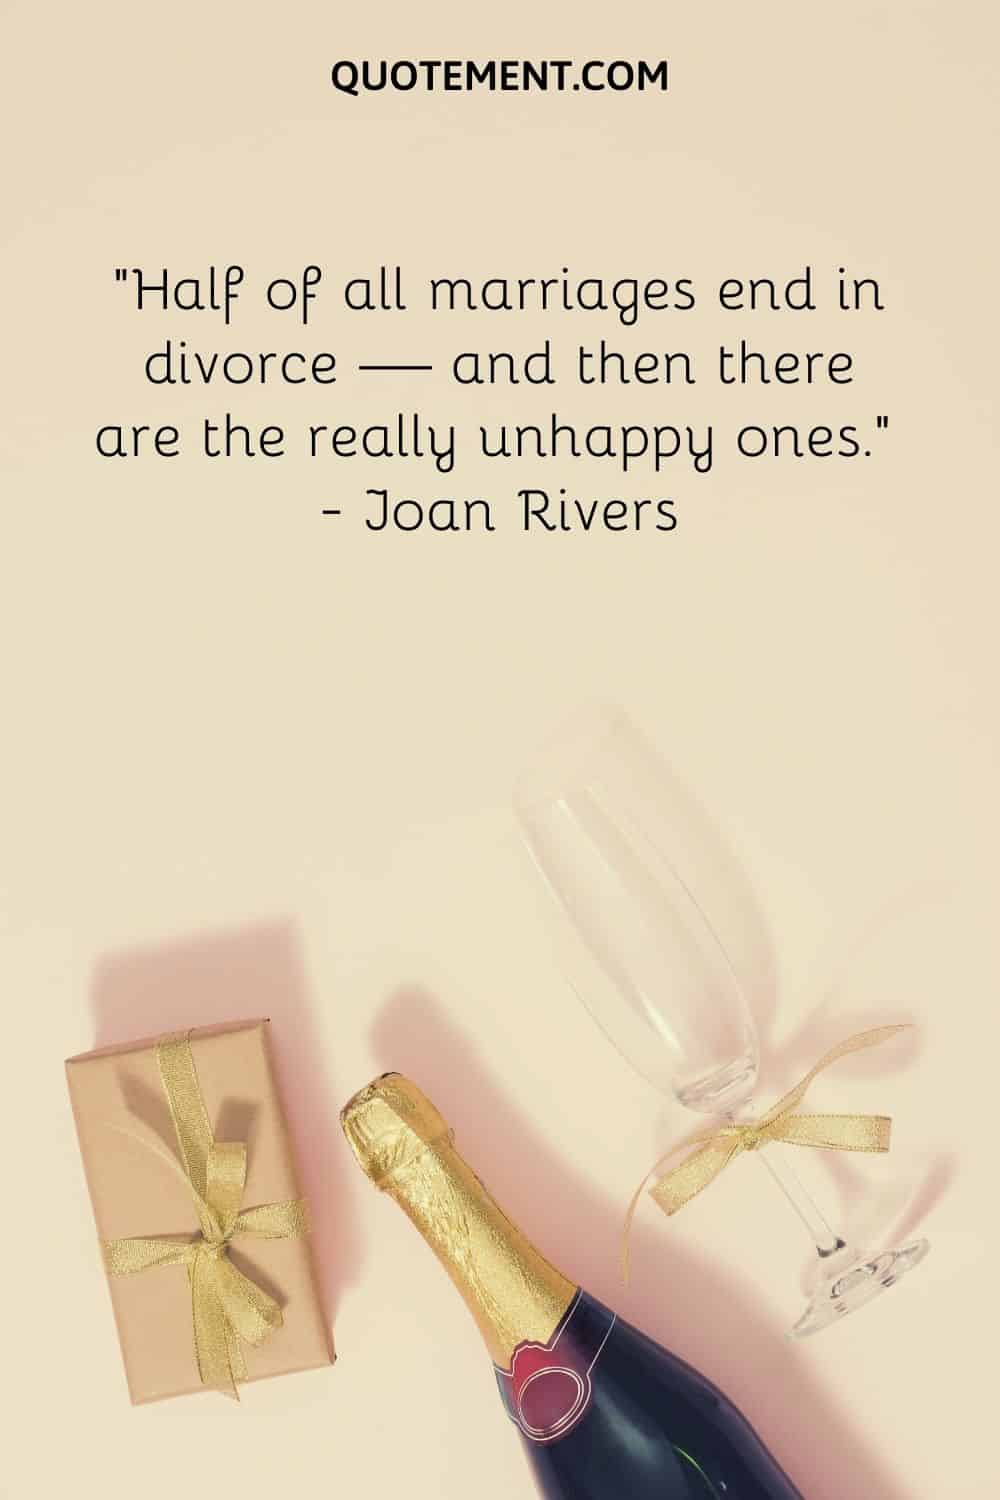 Half of all marriages end in divorce